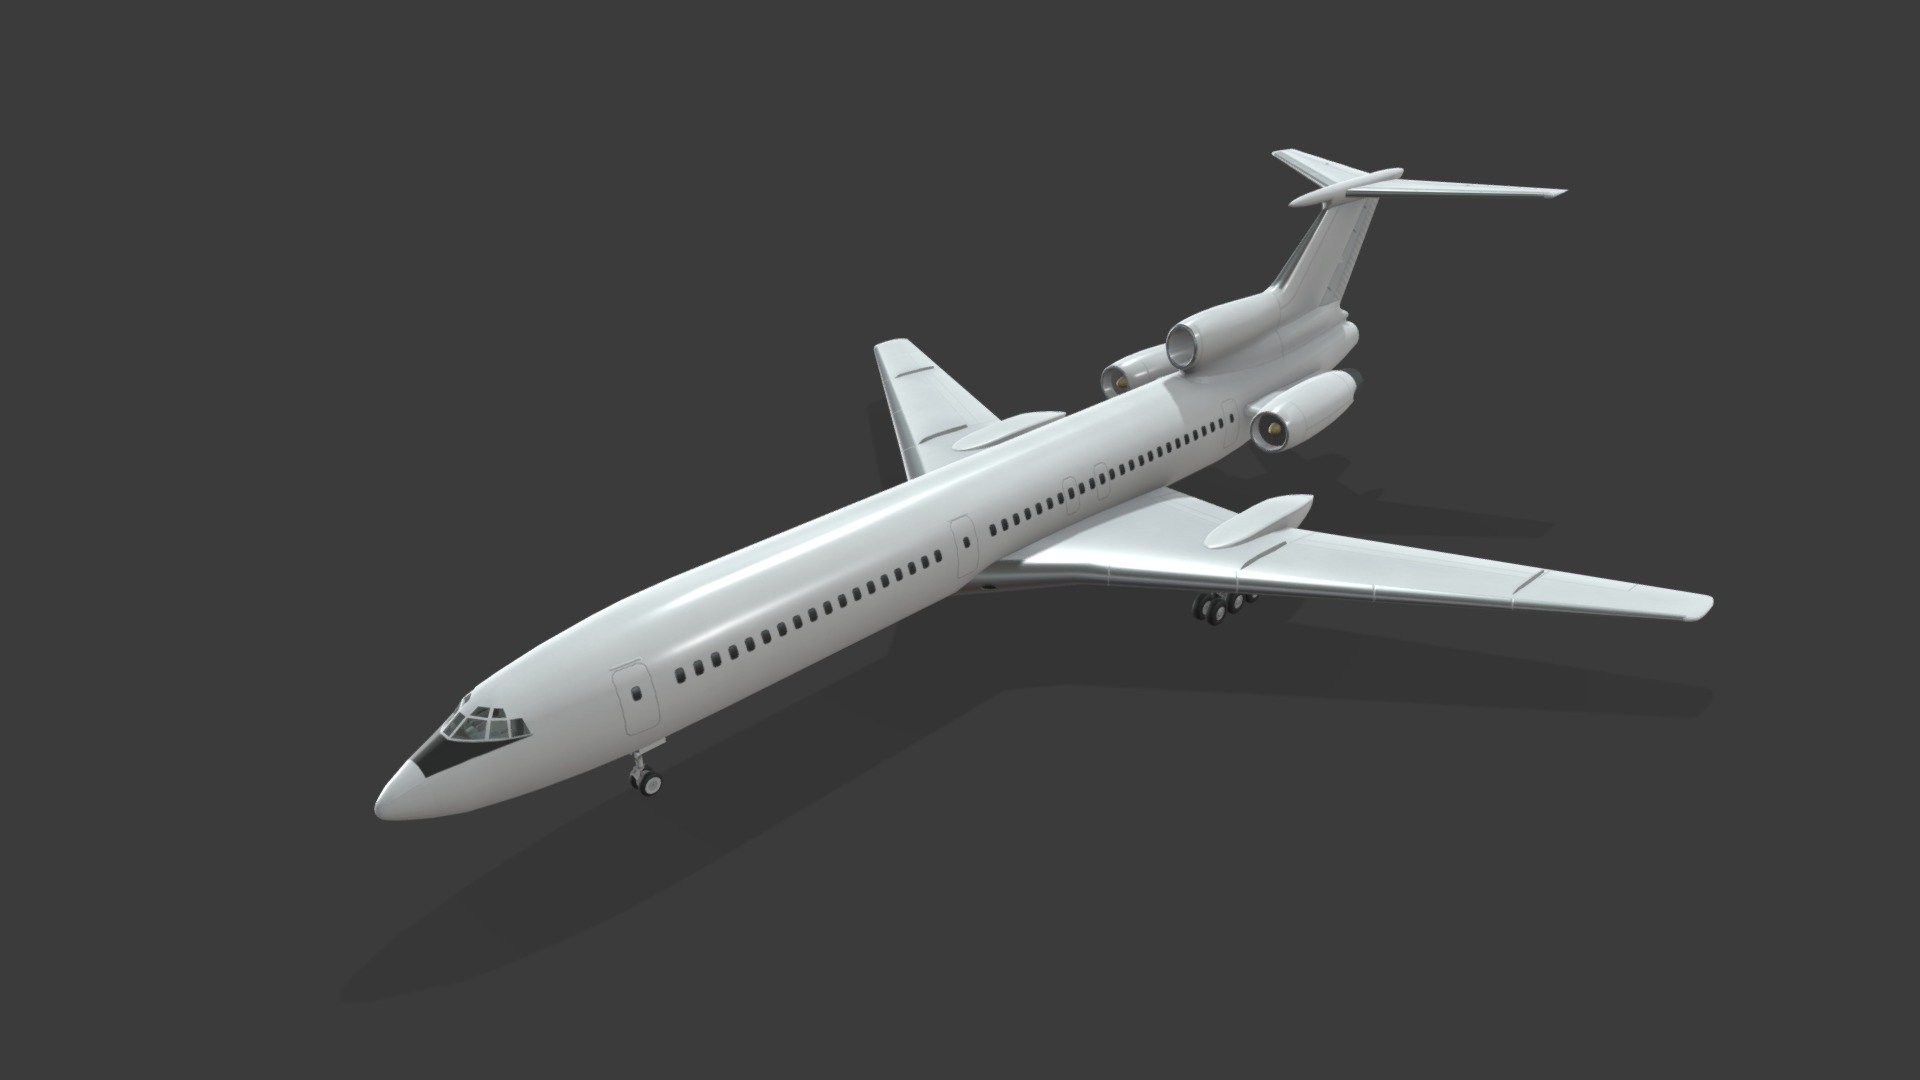 Tupolev Tu-154 Blank Livery



File formats: 3ds Max 2015, OBJ, FBX, 3DS, STL, Unity 2019.4.8



This model contains 5 LODs:

lod0: 38.965 tris

lod1: 22.393 tris

lod2: 13.139 tris

lod3: 7.708 tris

lod4: 4.242 tris



This model contains PNG textures(4096x4096):

-Base Color

-Metallness

-Roughness



-Diffuse

-Glossiness

-Specular



-Normal

-Ambient Occlusion - Tupolev Tu-154 Blank with Levels of Detail (LOD) - Buy Royalty Free 3D model by pukamakara 3d model